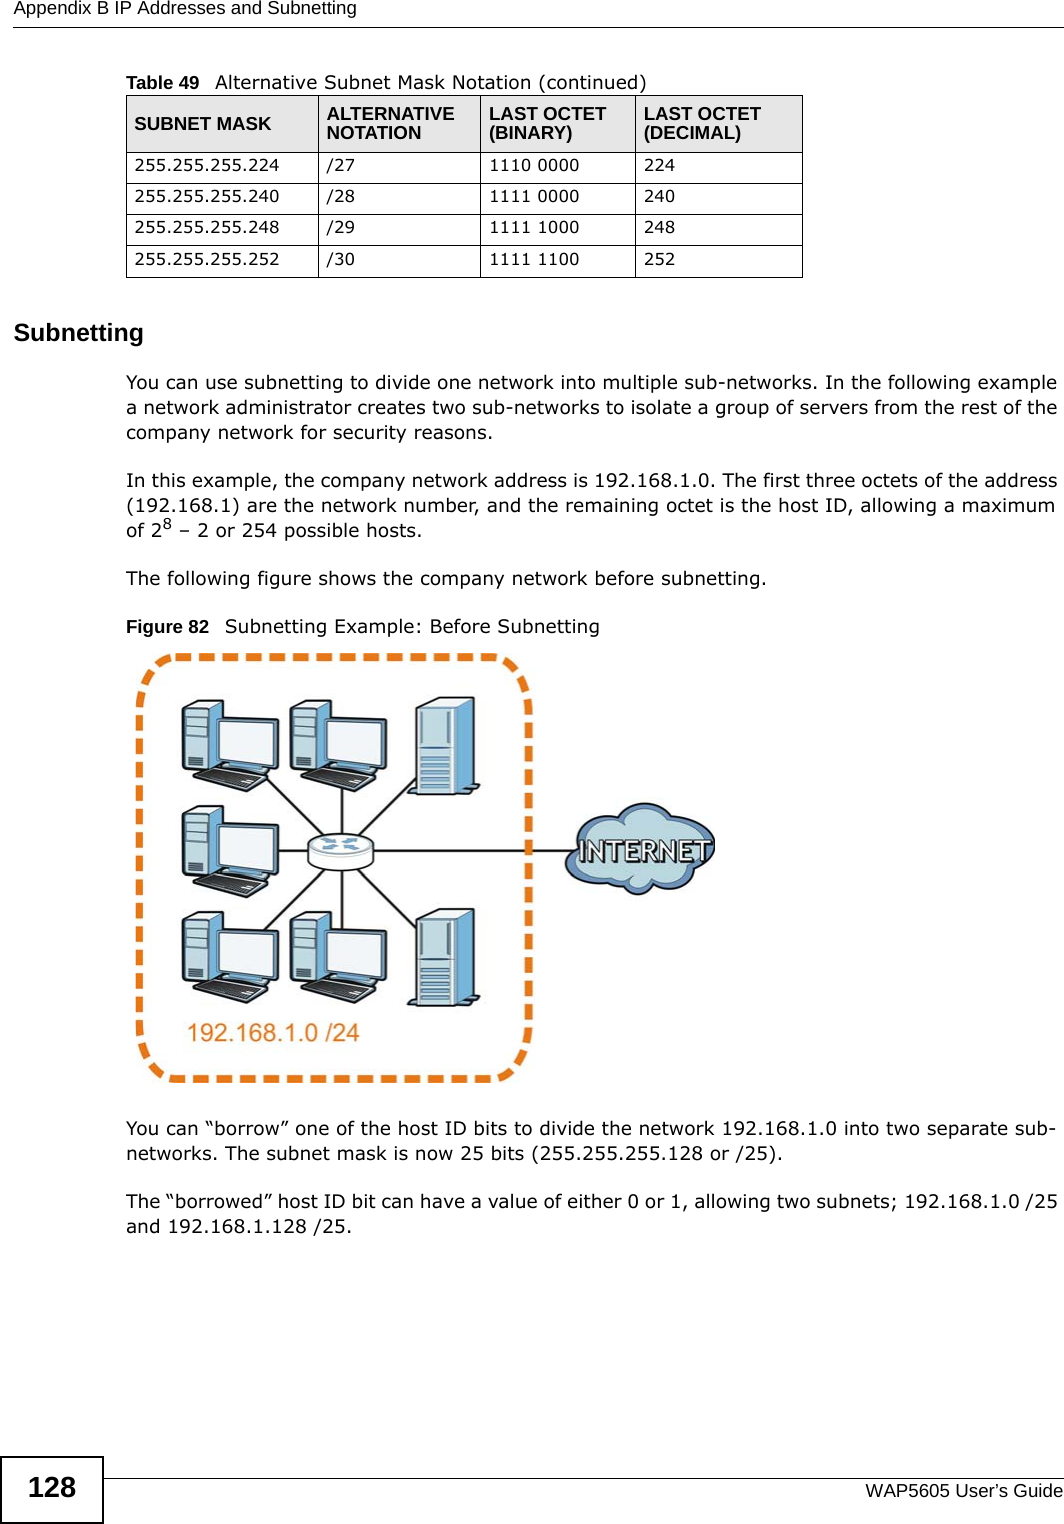 Appendix B IP Addresses and SubnettingWAP5605 User’s Guide128SubnettingYou can use subnetting to divide one network into multiple sub-networks. In the following example a network administrator creates two sub-networks to isolate a group of servers from the rest of the company network for security reasons.In this example, the company network address is 192.168.1.0. The first three octets of the address (192.168.1) are the network number, and the remaining octet is the host ID, allowing a maximum of 28 – 2 or 254 possible hosts.The following figure shows the company network before subnetting.  Figure 82   Subnetting Example: Before SubnettingYou can “borrow” one of the host ID bits to divide the network 192.168.1.0 into two separate sub-networks. The subnet mask is now 25 bits (255.255.255.128 or /25).The “borrowed” host ID bit can have a value of either 0 or 1, allowing two subnets; 192.168.1.0 /25 and 192.168.1.128 /25. 255.255.255.224 /27 1110 0000 224255.255.255.240 /28 1111 0000 240255.255.255.248 /29 1111 1000 248255.255.255.252 /30 1111 1100 252Table 49   Alternative Subnet Mask Notation (continued)SUBNET MASK ALTERNATIVE NOTATION LAST OCTET (BINARY) LAST OCTET (DECIMAL)